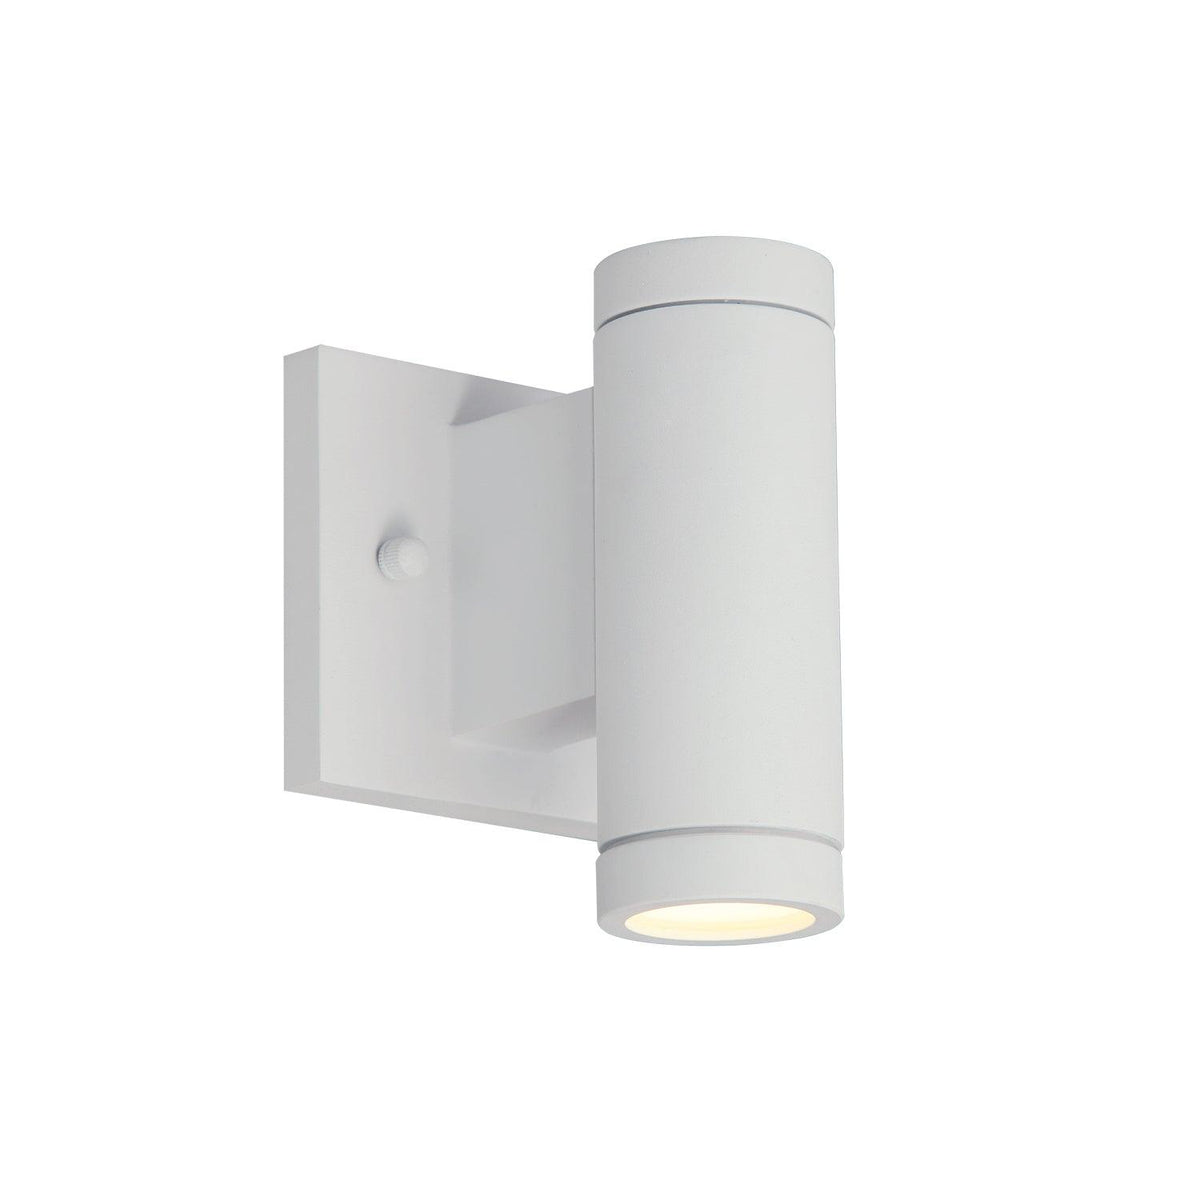 Justice Designs - Portico LED Outdoor Wall Sconce - NSH-4110W-MBLK | Montreal Lighting & Hardware